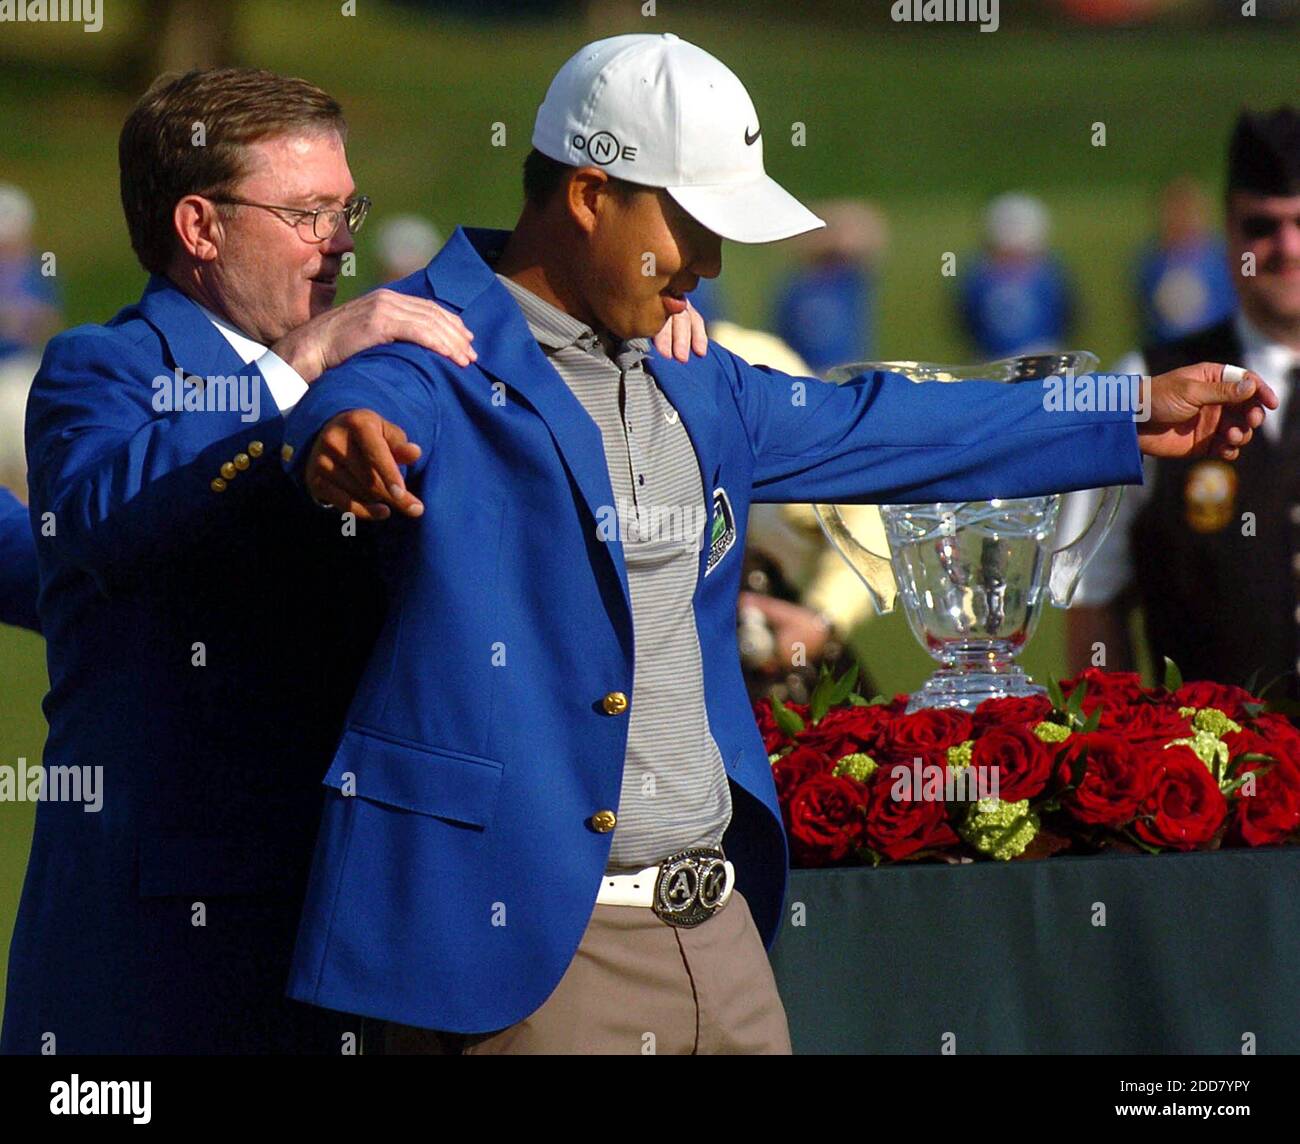 NO FILM, NO VIDEO, NO TV, NO DOCUMENTARY - Ken Thompson, CEO of Wachovia, (left) helps Anthony Kim put on his champion's jacket, after Kim won the Wachovia Championship at Quail Hollow Club in Charlotte, NC, USA on May 4, 2008. Kim won the tournament, finishing at -16 under for the tournament. Photo by Layne Bailey/Charlotte Observer/MCT/ABACAPRESS.COM Stock Photo